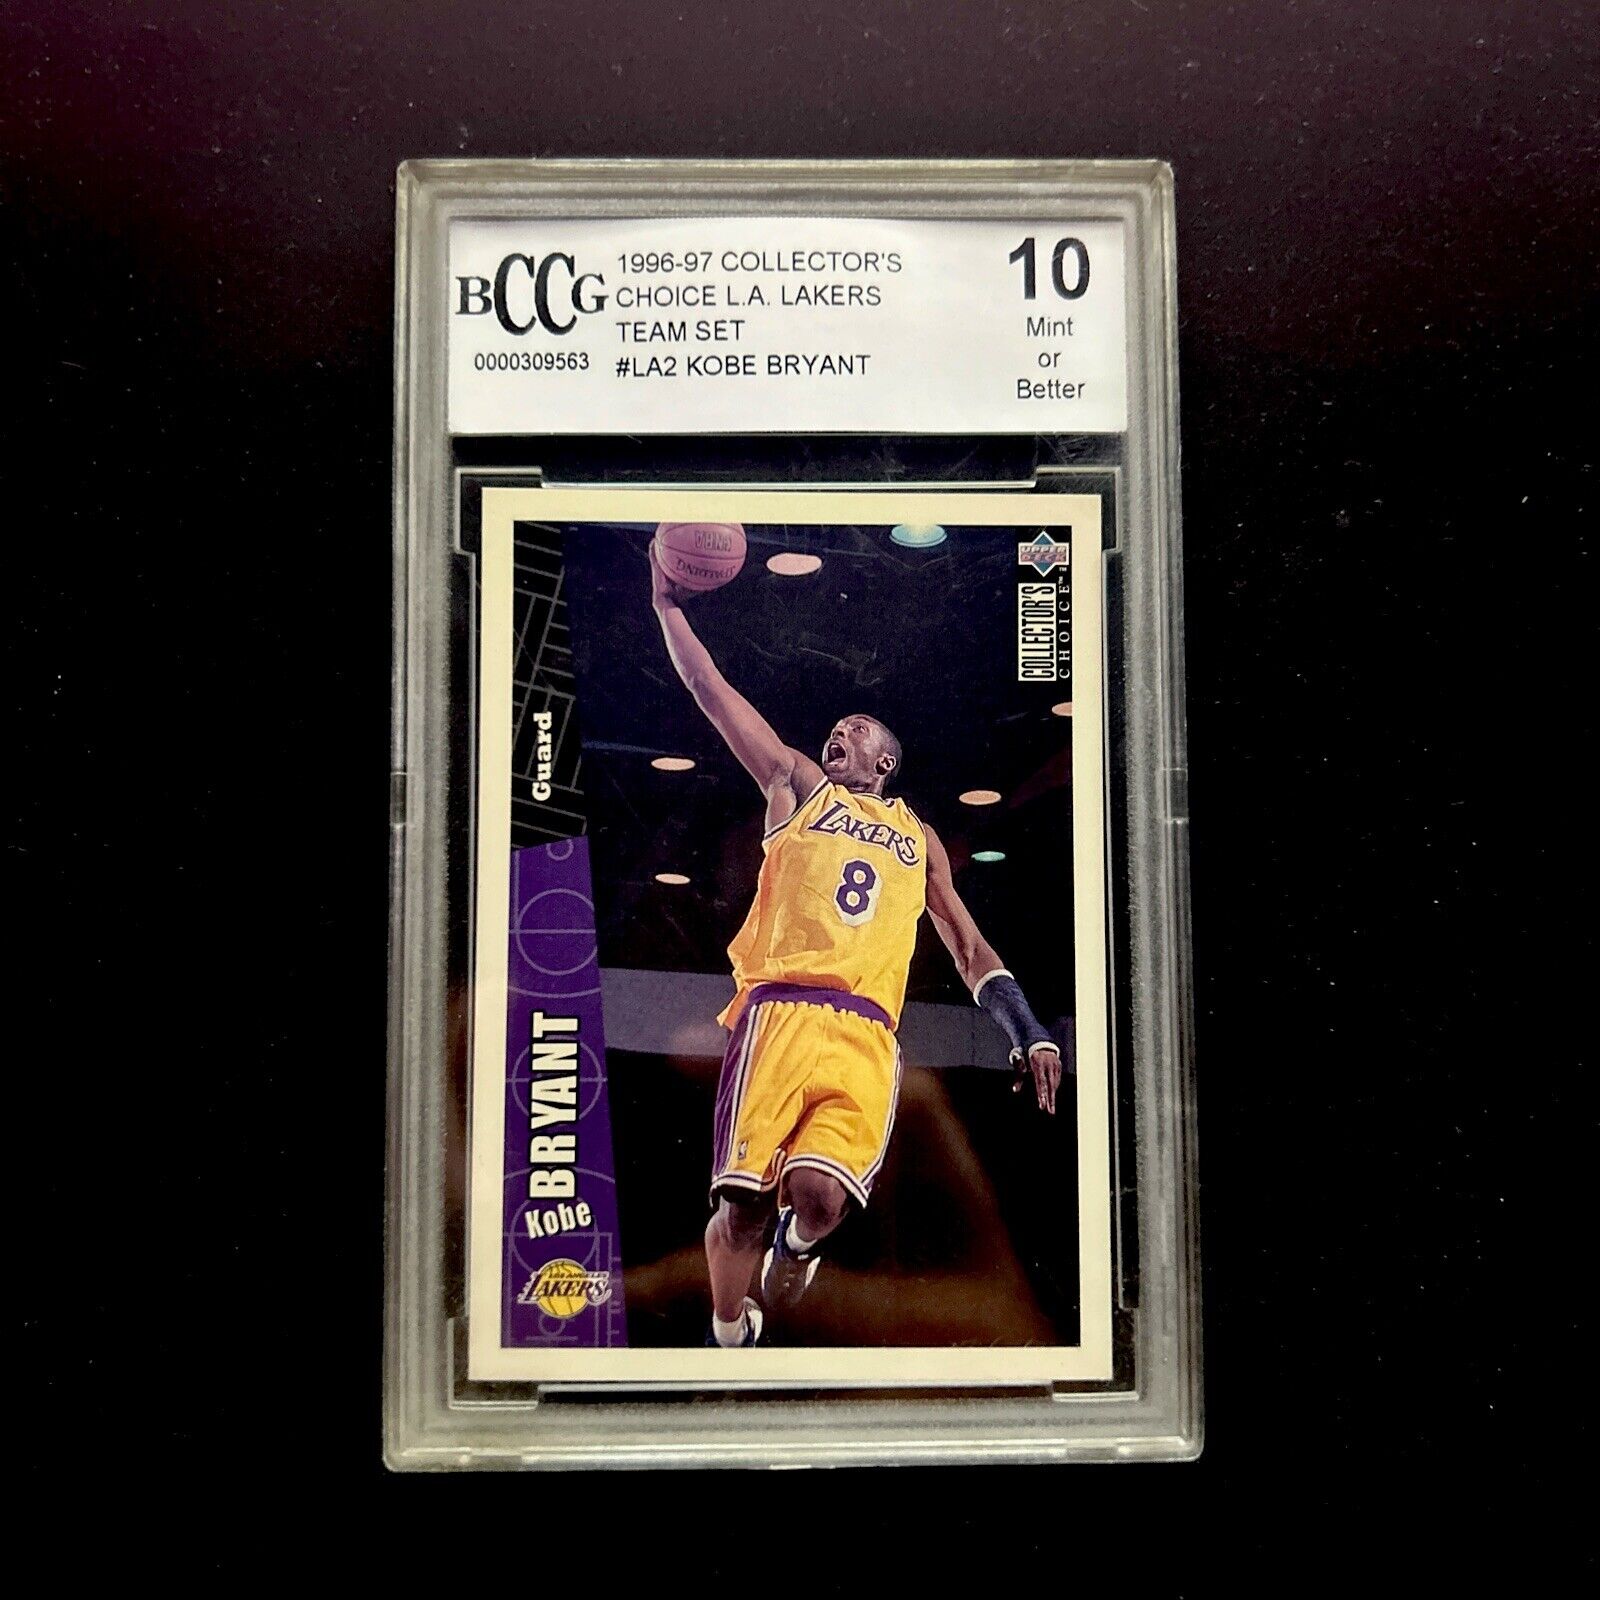 1996-97 Upper Deck Collector's Choice - #267 Kobe Bryant (RC) BCCG MINT 10